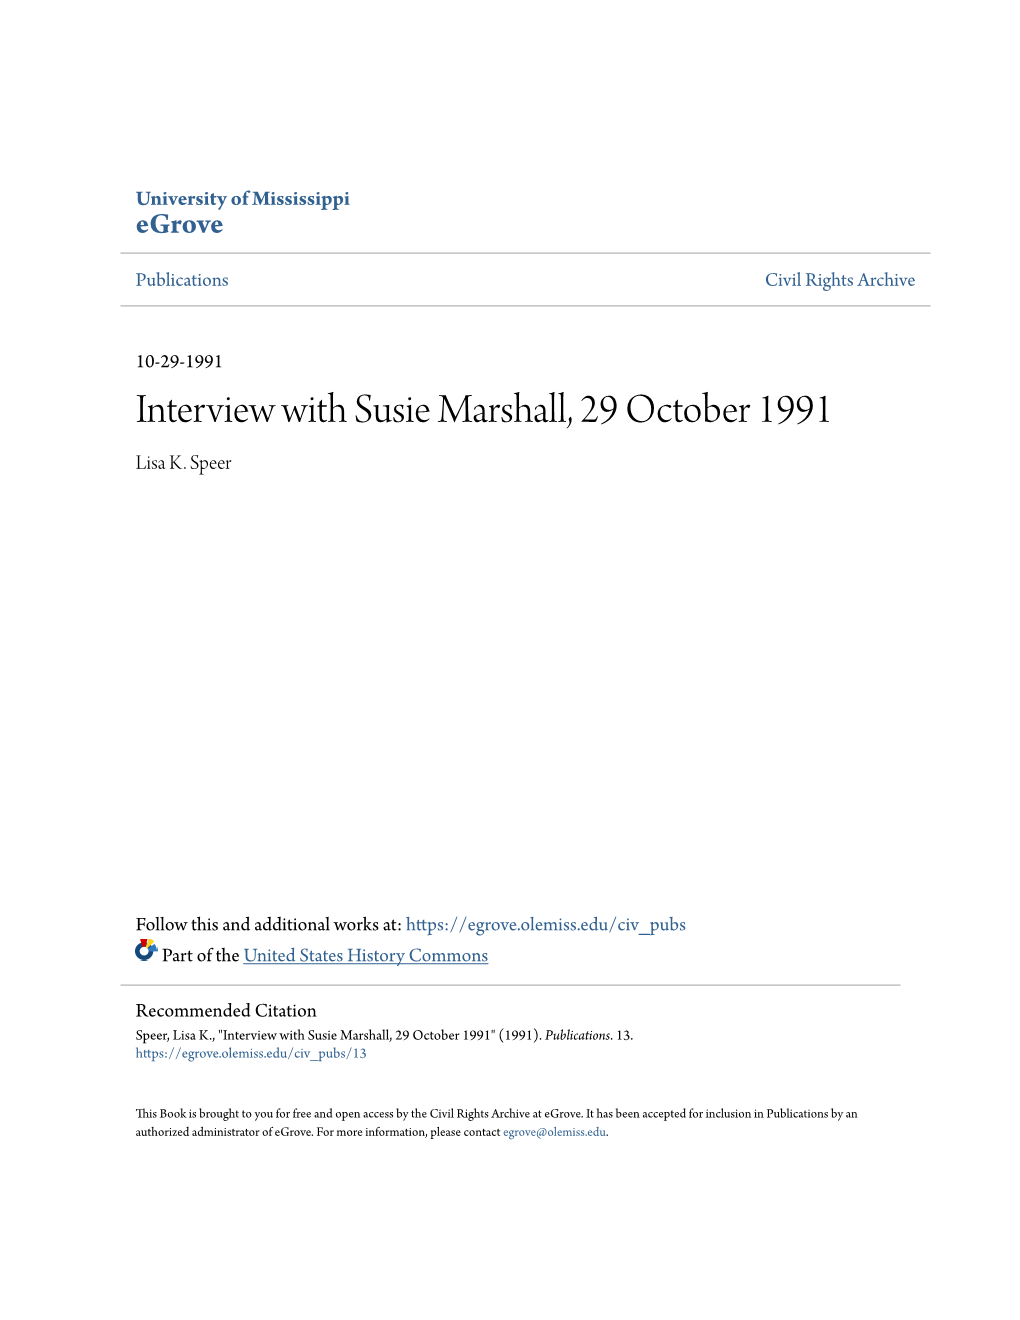 Interview with Susie Marshall, 29 October 1991 Lisa K